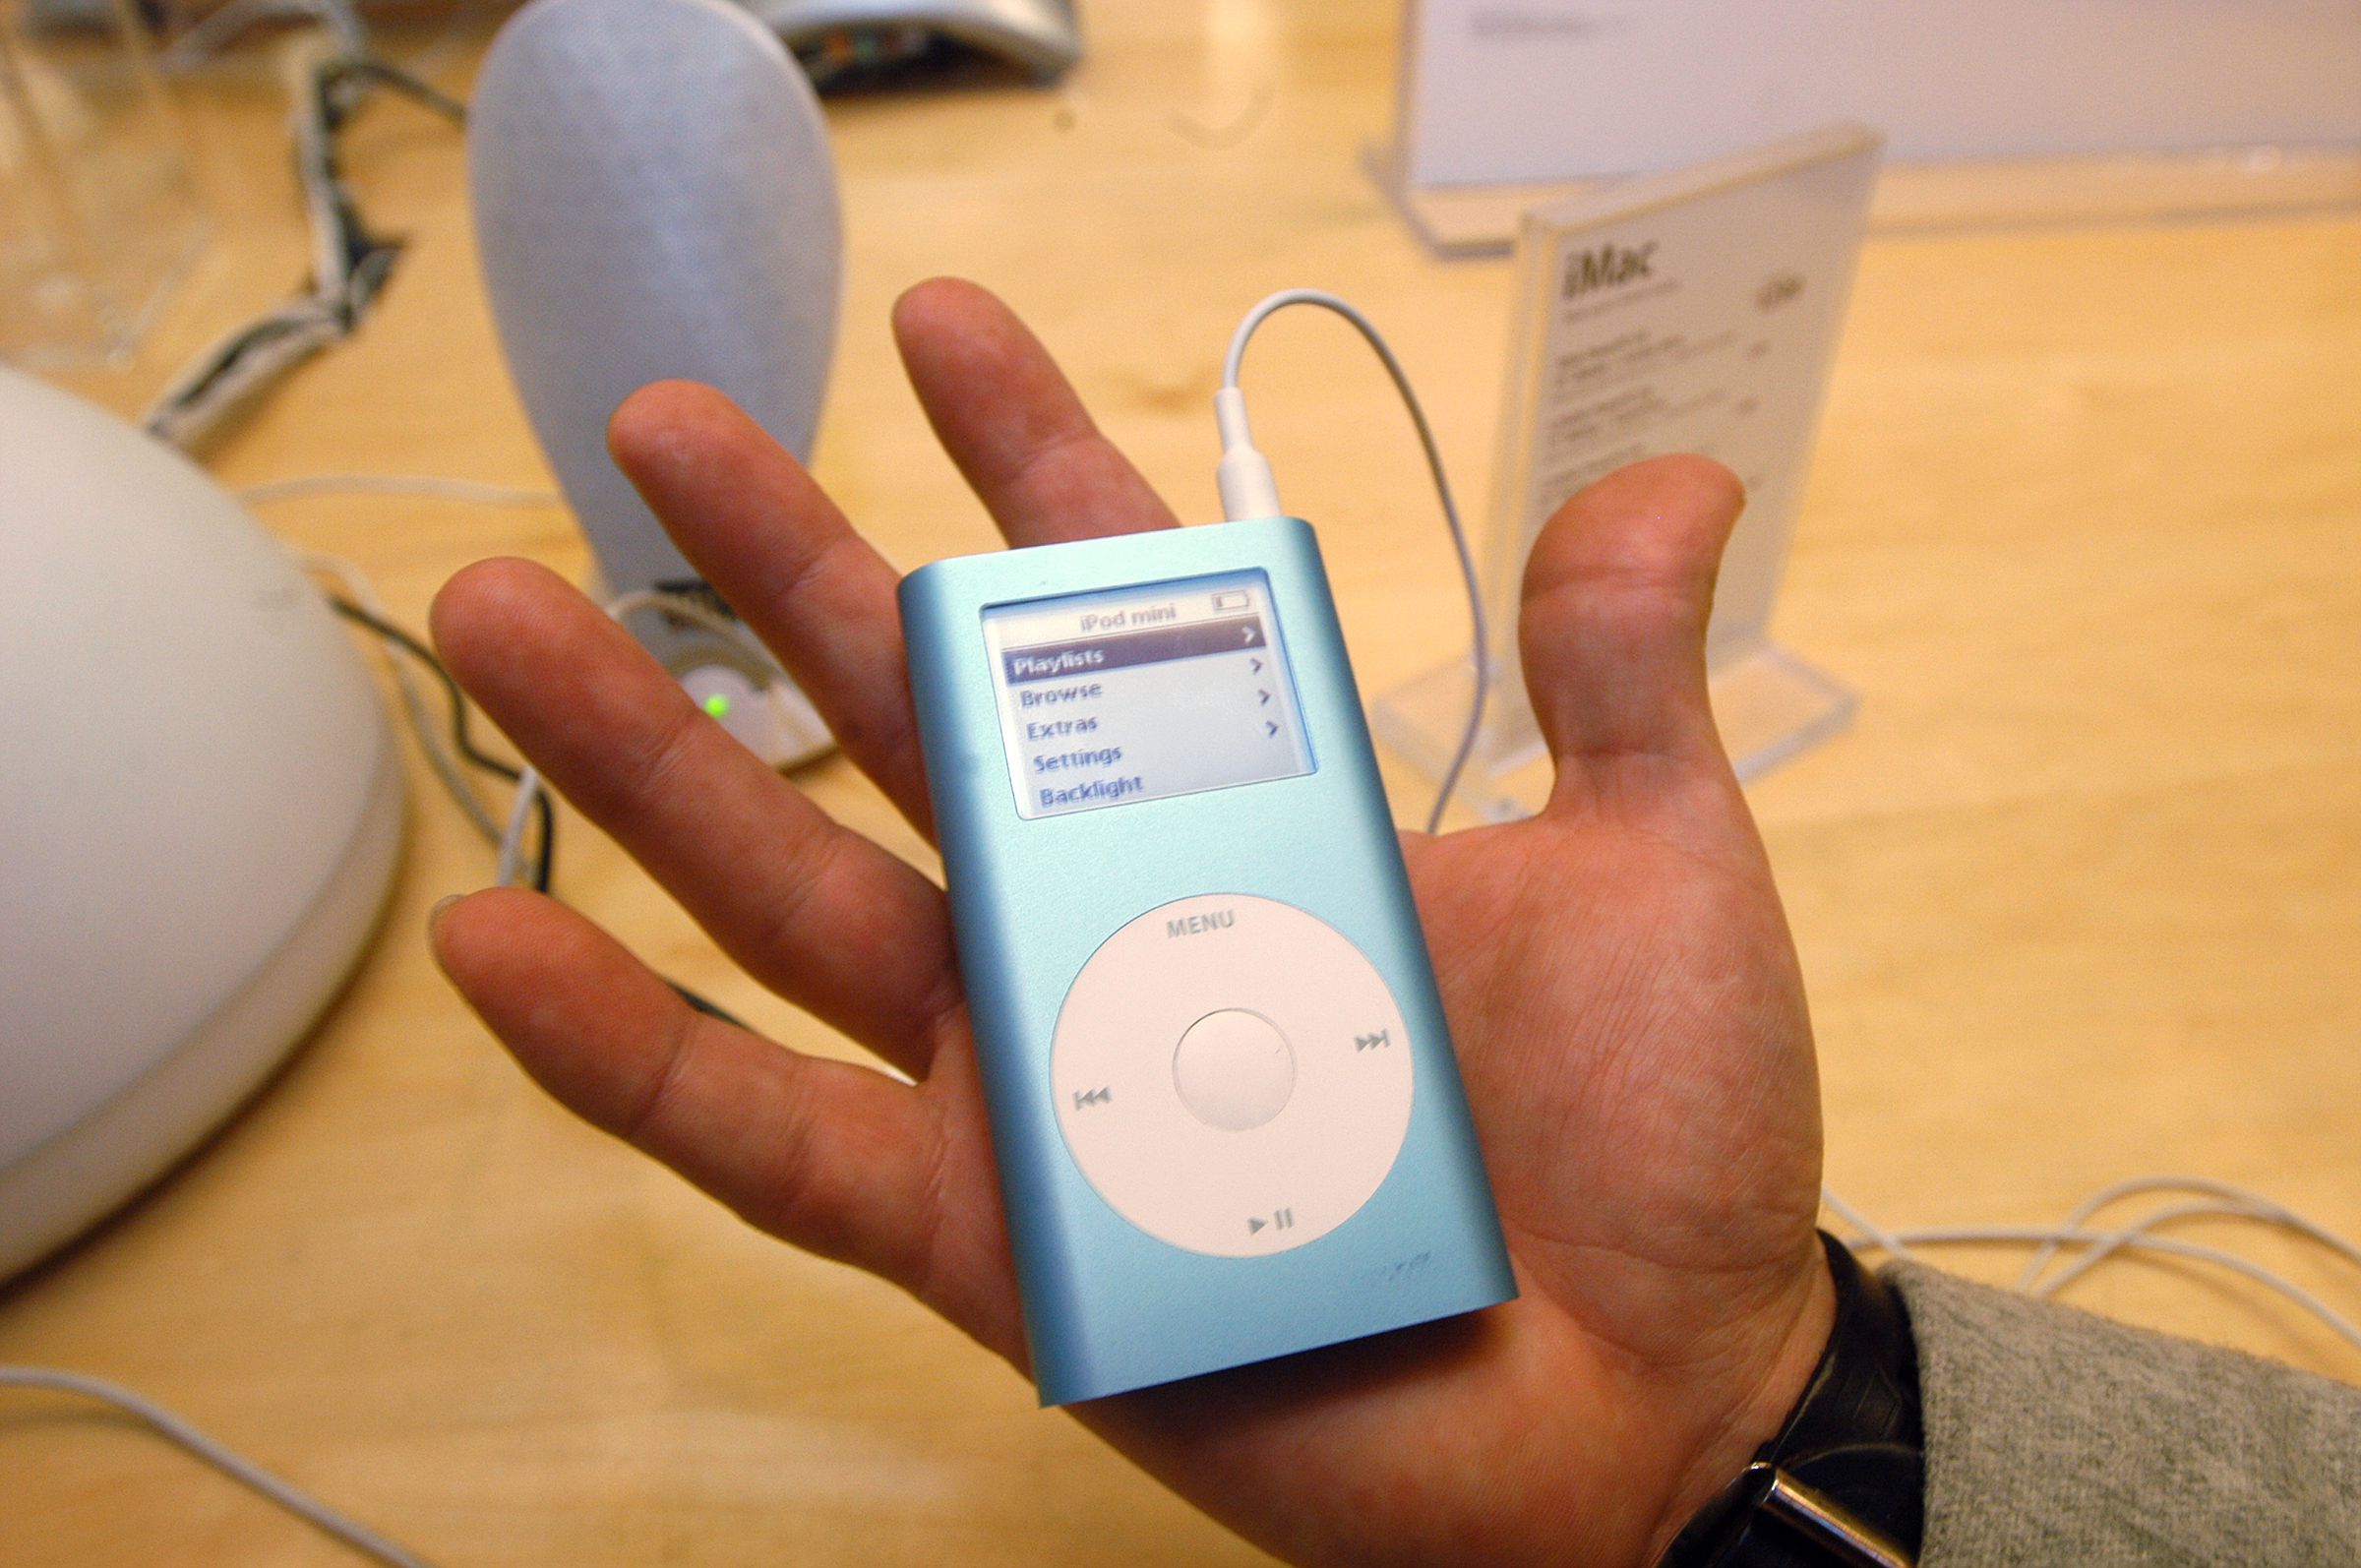 Apple Ipod Mini at the Apple Computer store in Soho.,